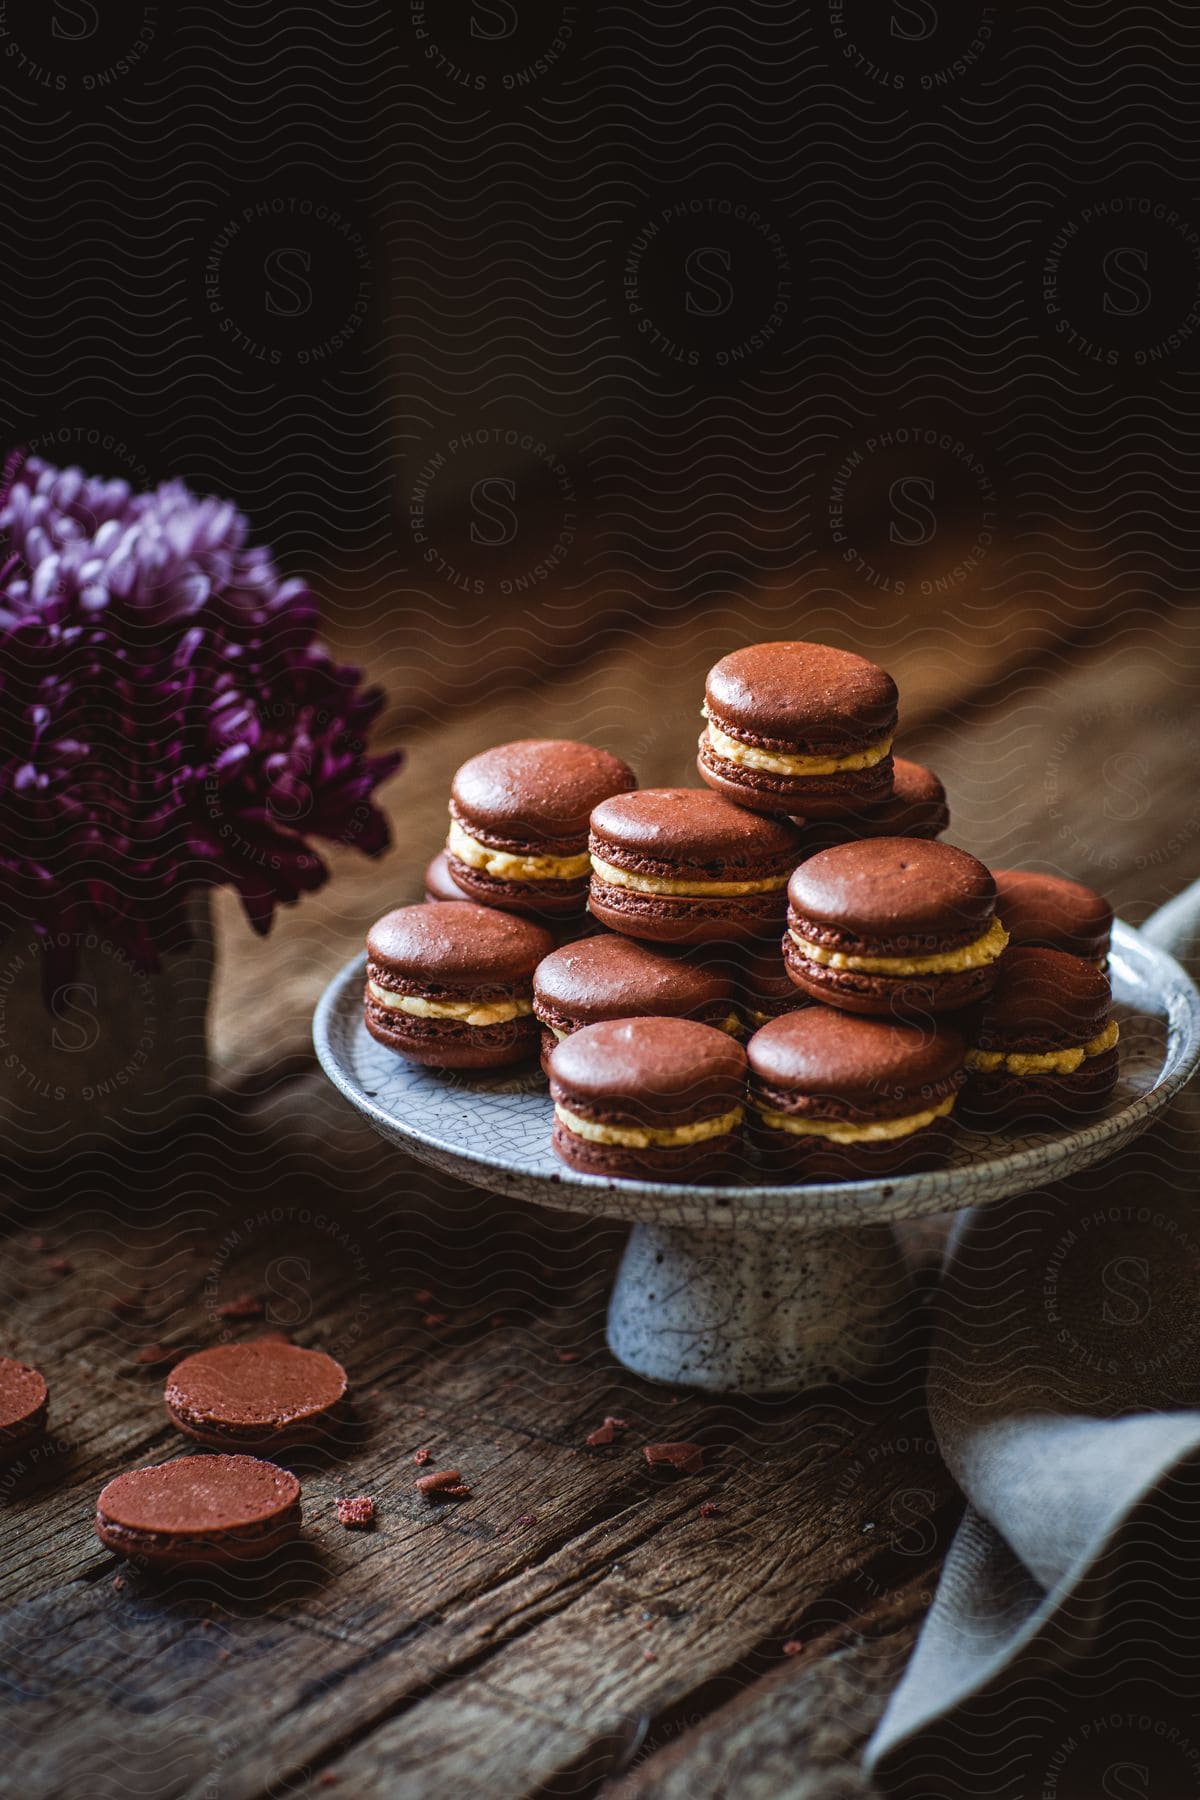 Chocolate macarons are displayed on a platter next to a purple potted plant